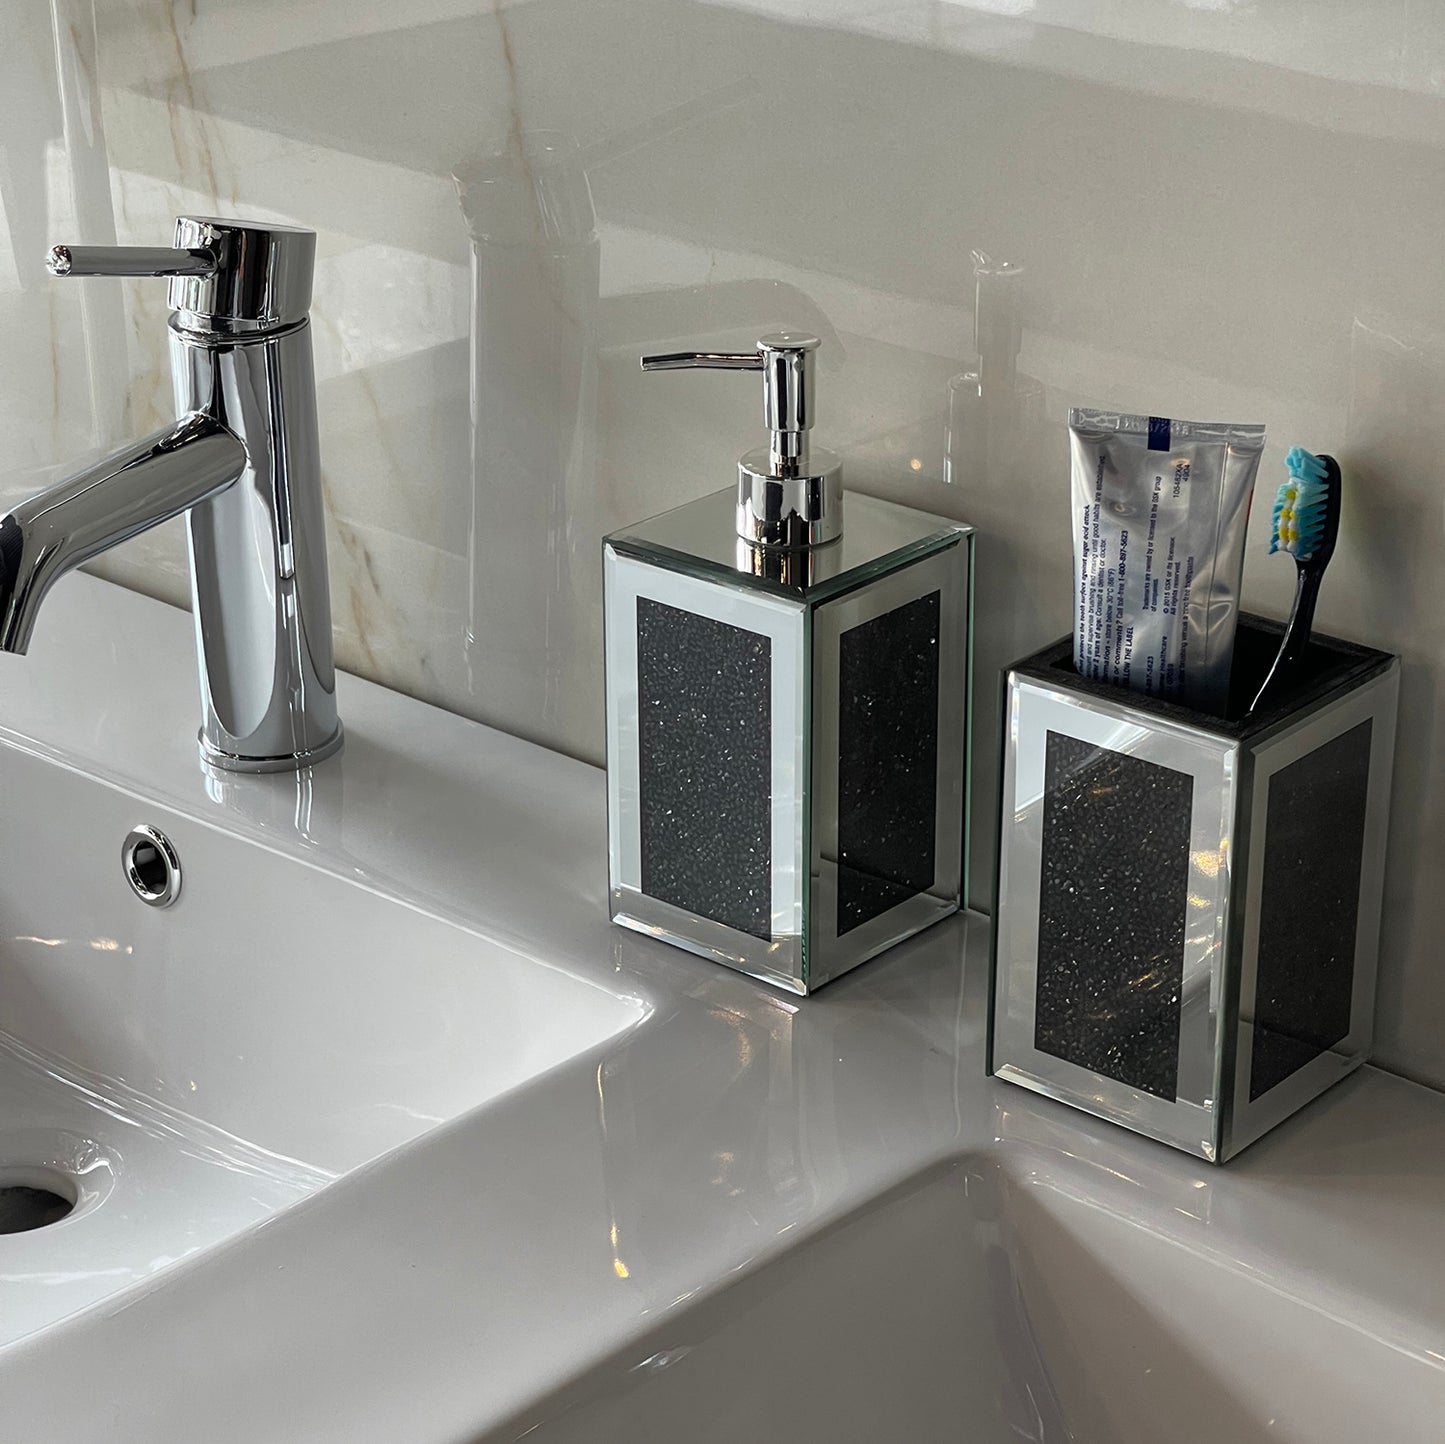 Ambrose Exquisite 2 Piece Square Soap Dispenser and Toothbrush Holder Bathroom Accessories